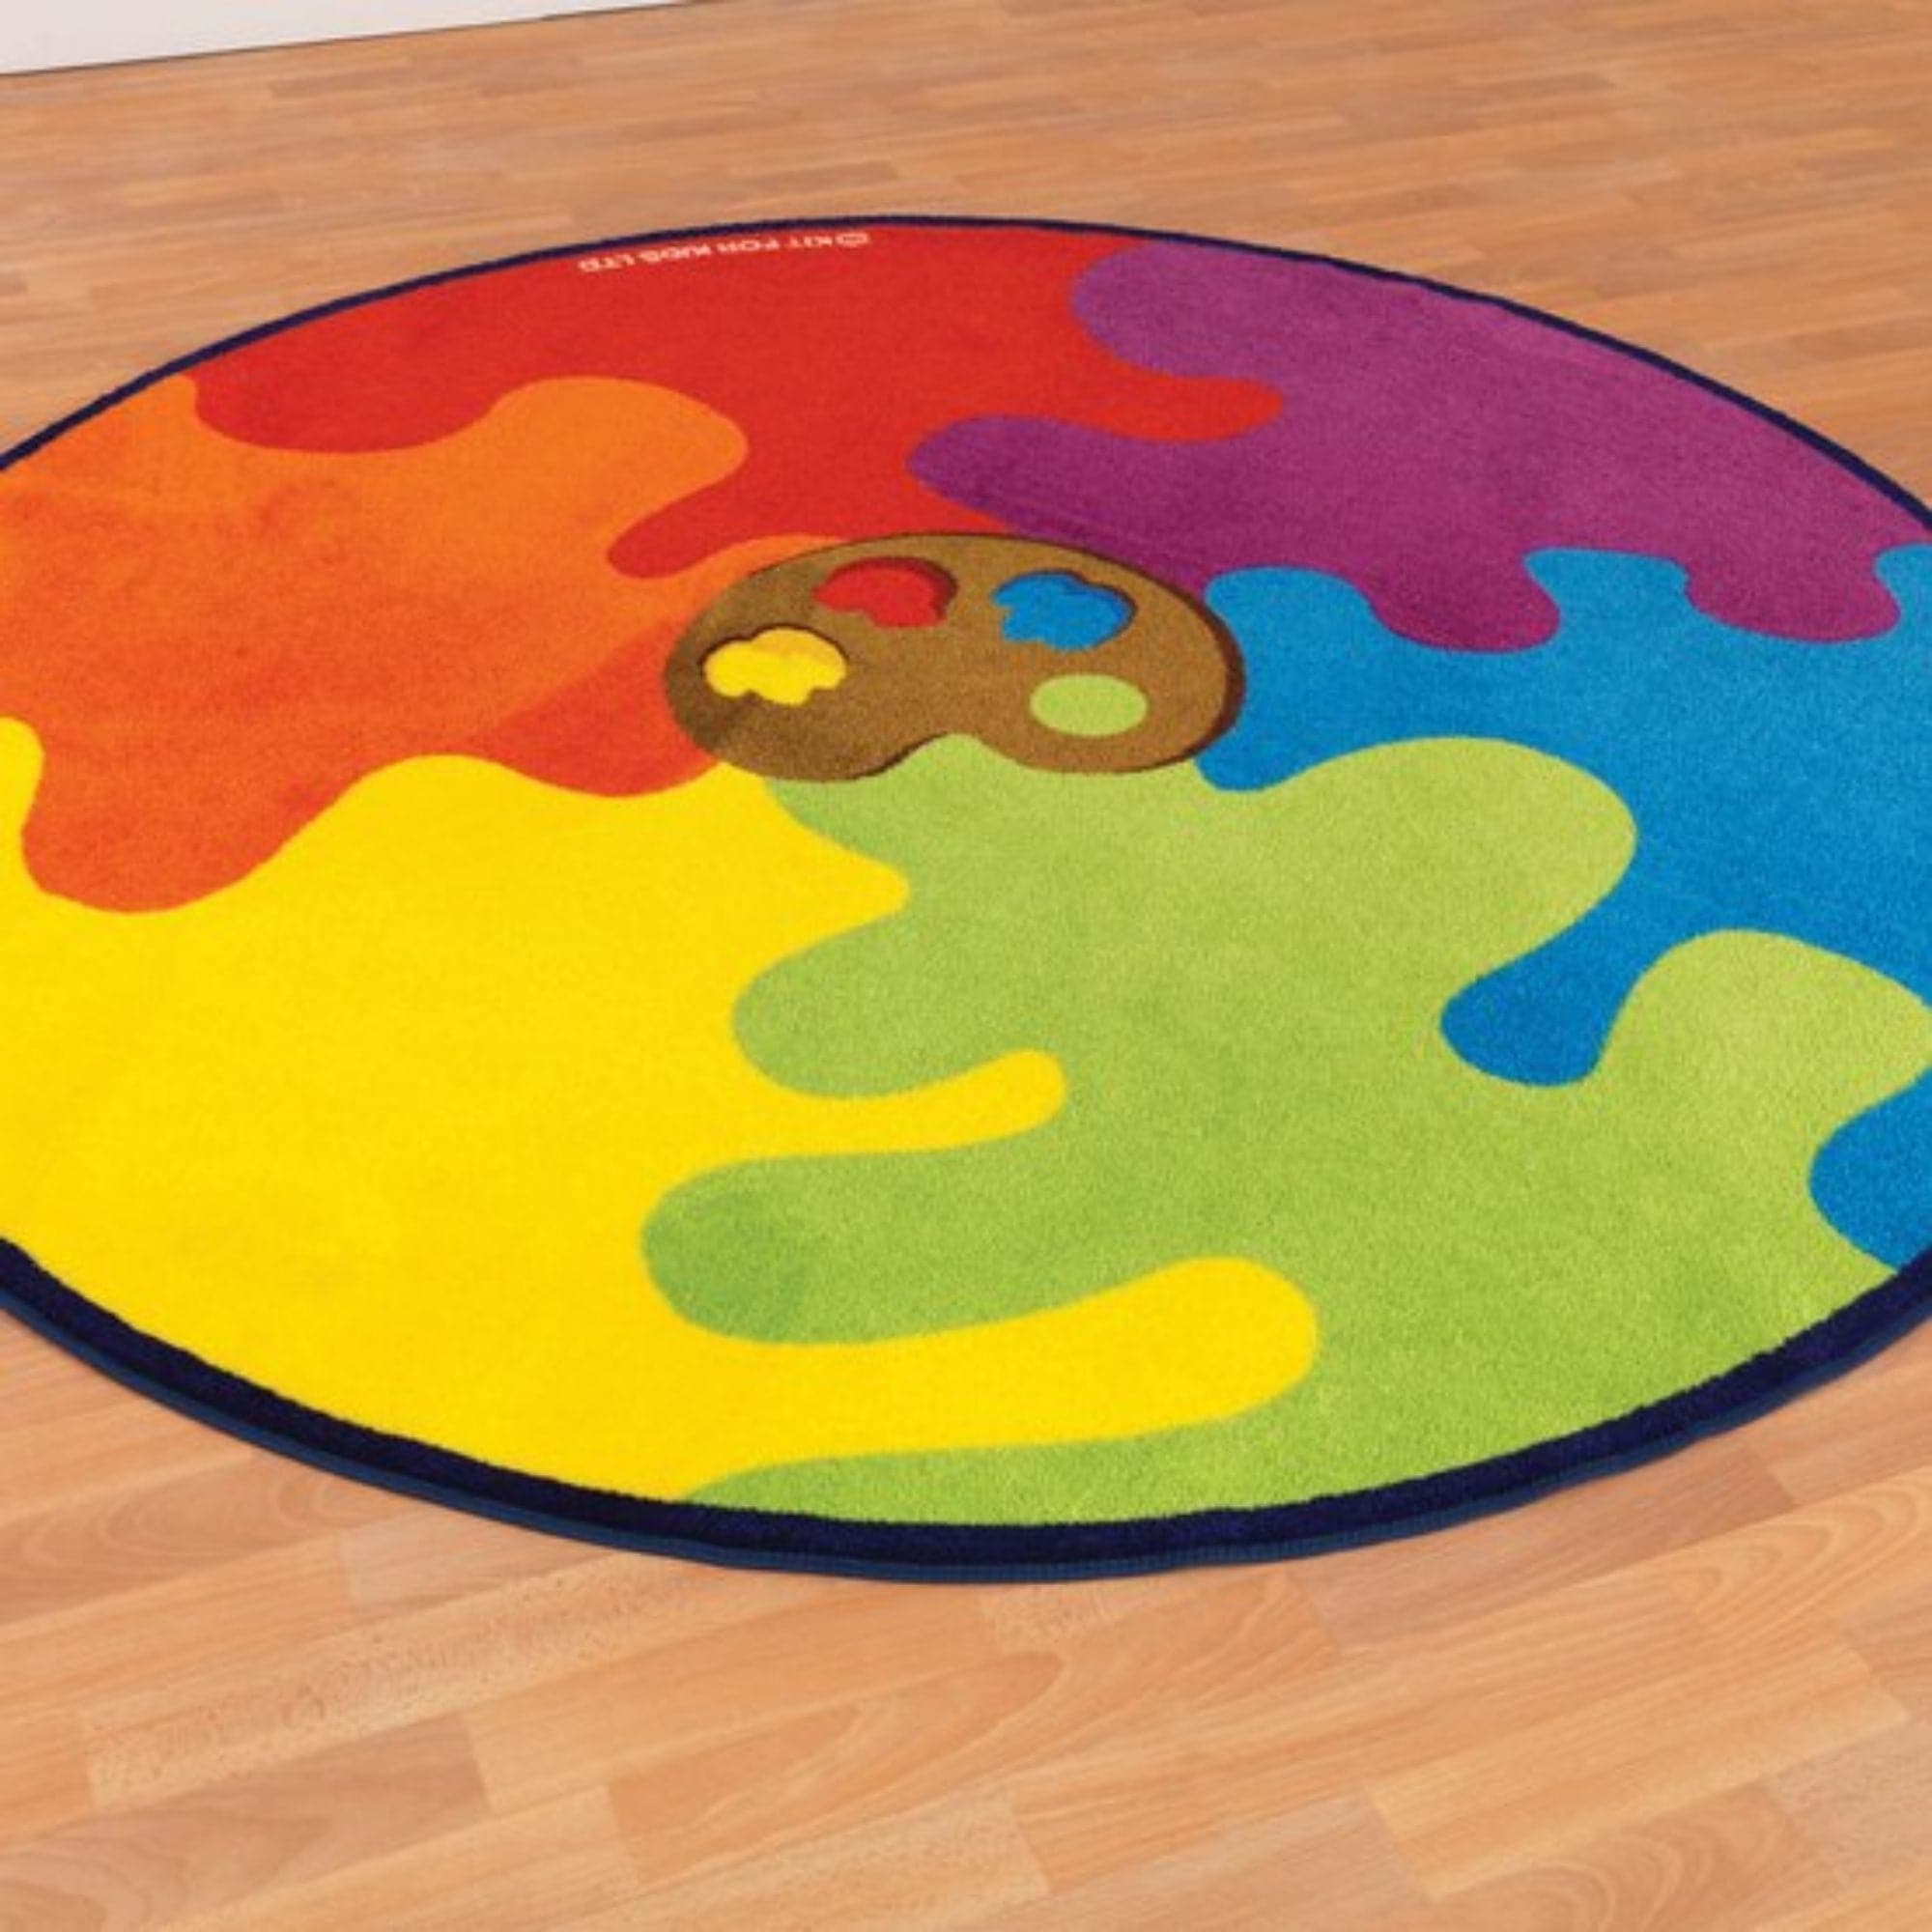 Rainbow Colour Palette Carpet, This vibrant Decorative Rainbow Colour Palette Carpet will brighten up any indoor classroom space. The Rainbow Colour Palette Carpet will develop children's knowledge of primary and secondary colours. The Rainbow Colour Palette Carpet is Ideal for rest and reading activities. Also a great and functional carpet to brighten up any classroom. The Rainbow Colour Palette Carpet is a functional carpet made with heavy duty tuf-pile, with anti slip backing to ensure safety on differen